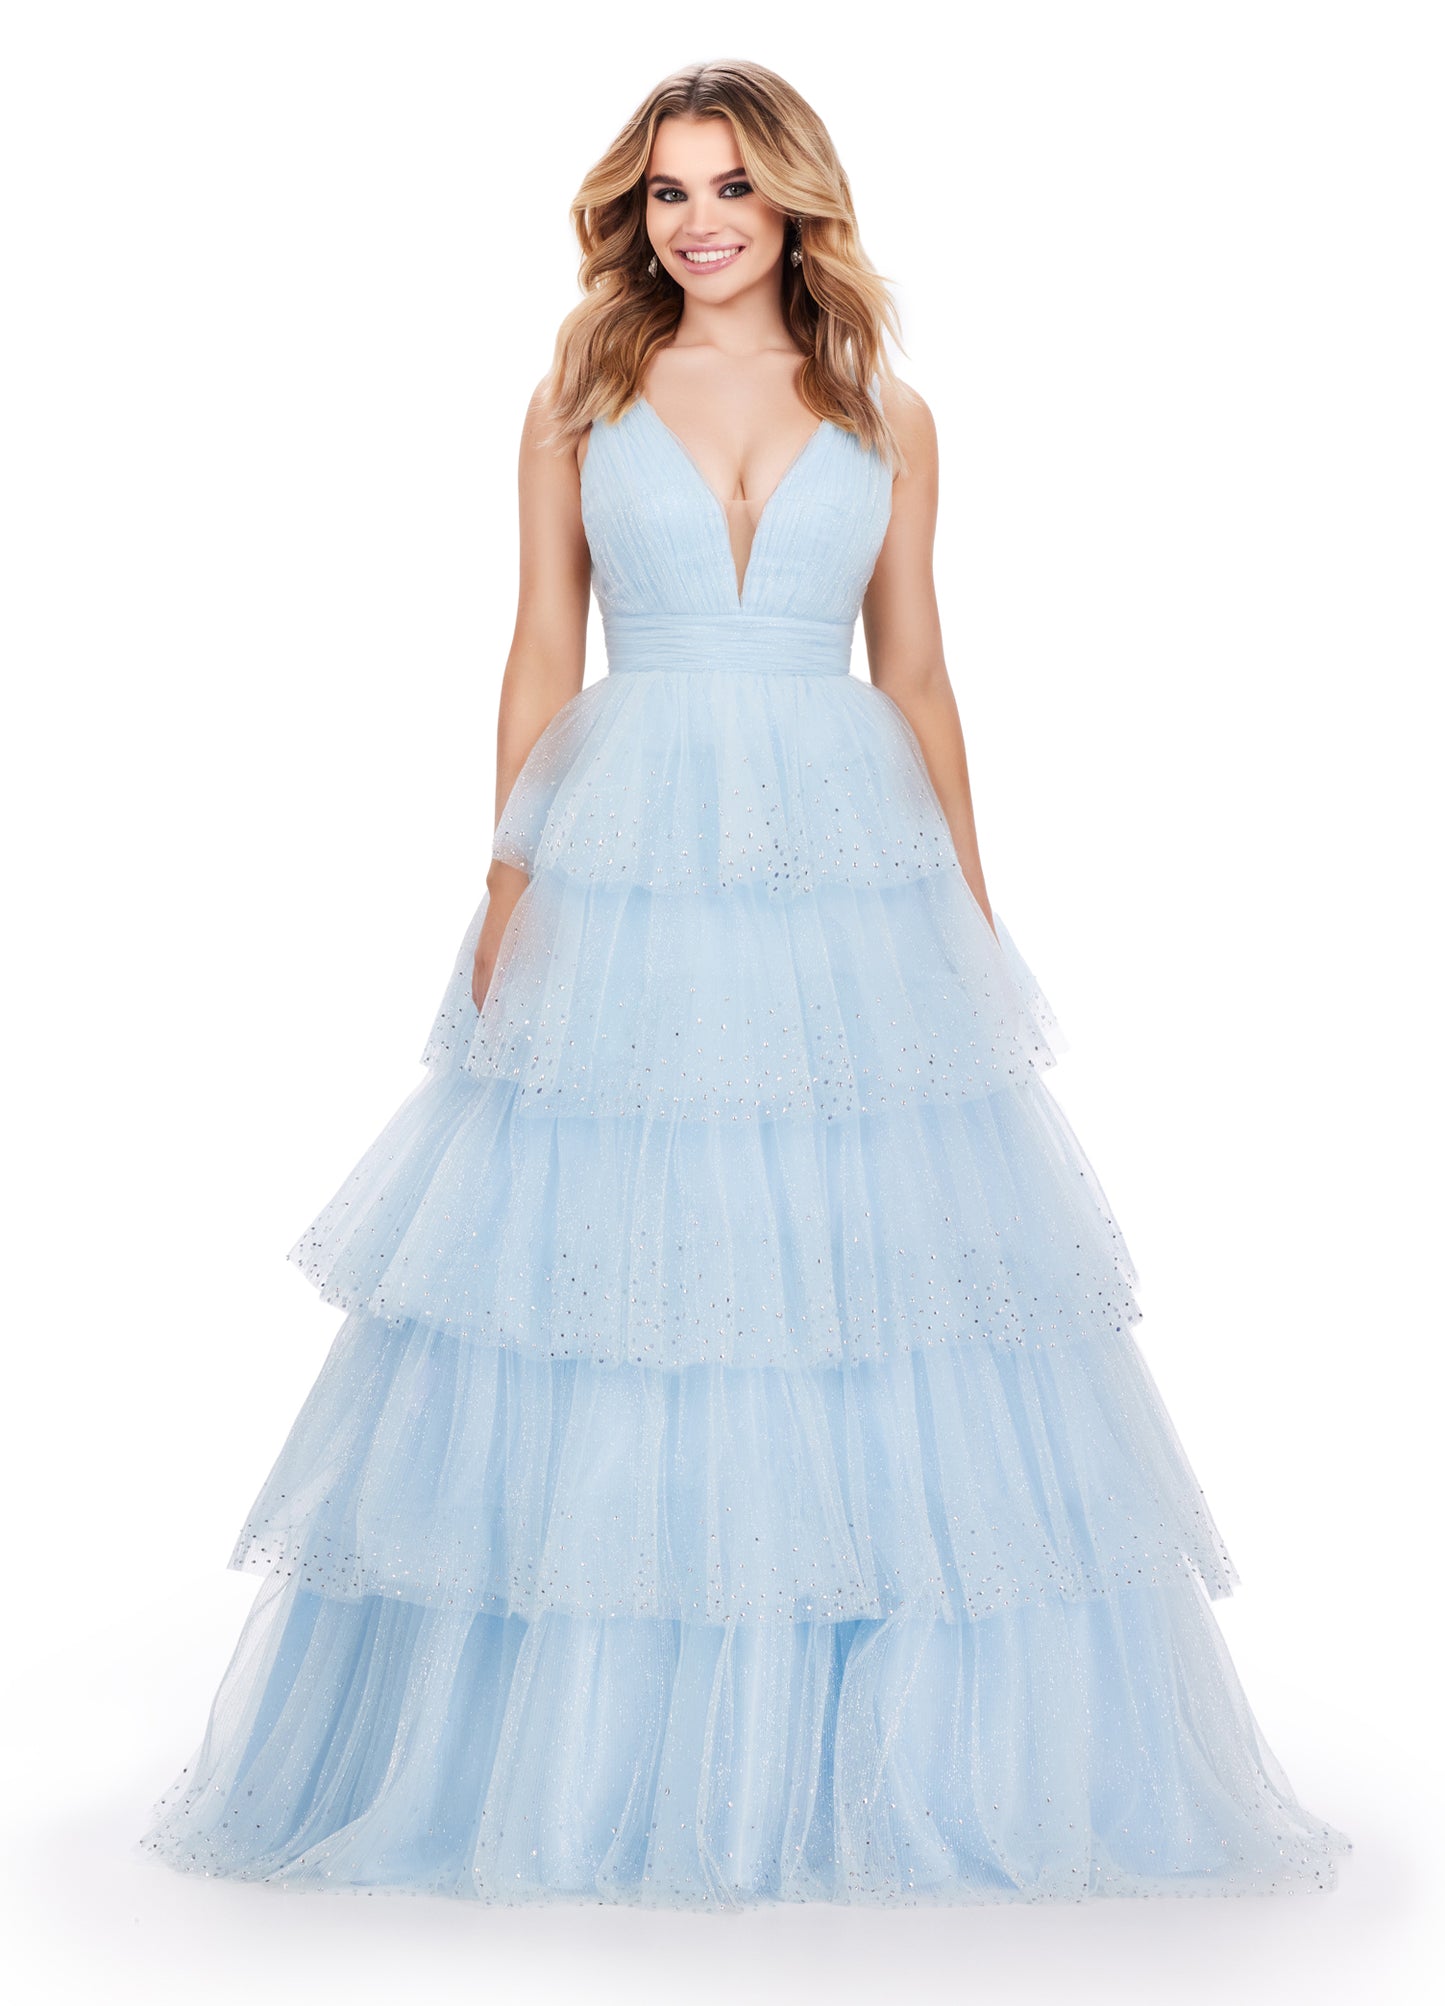 Ashley Lauren 11672 Long Layered Tulle Crystal Ball Gown Prom Dress Formal Pageant You are sure to stand out in this glitter tulle v-neckline ball gown! The glitter tulle is sure to sparkle with the added heat-set stones throughout the multi-tiered skirt.  COLORS: Lilac, Sky, Black, Hot Pink Sizes: 00-24 V-Neckline V-Back A-Line Tiered Ruffle Skirt